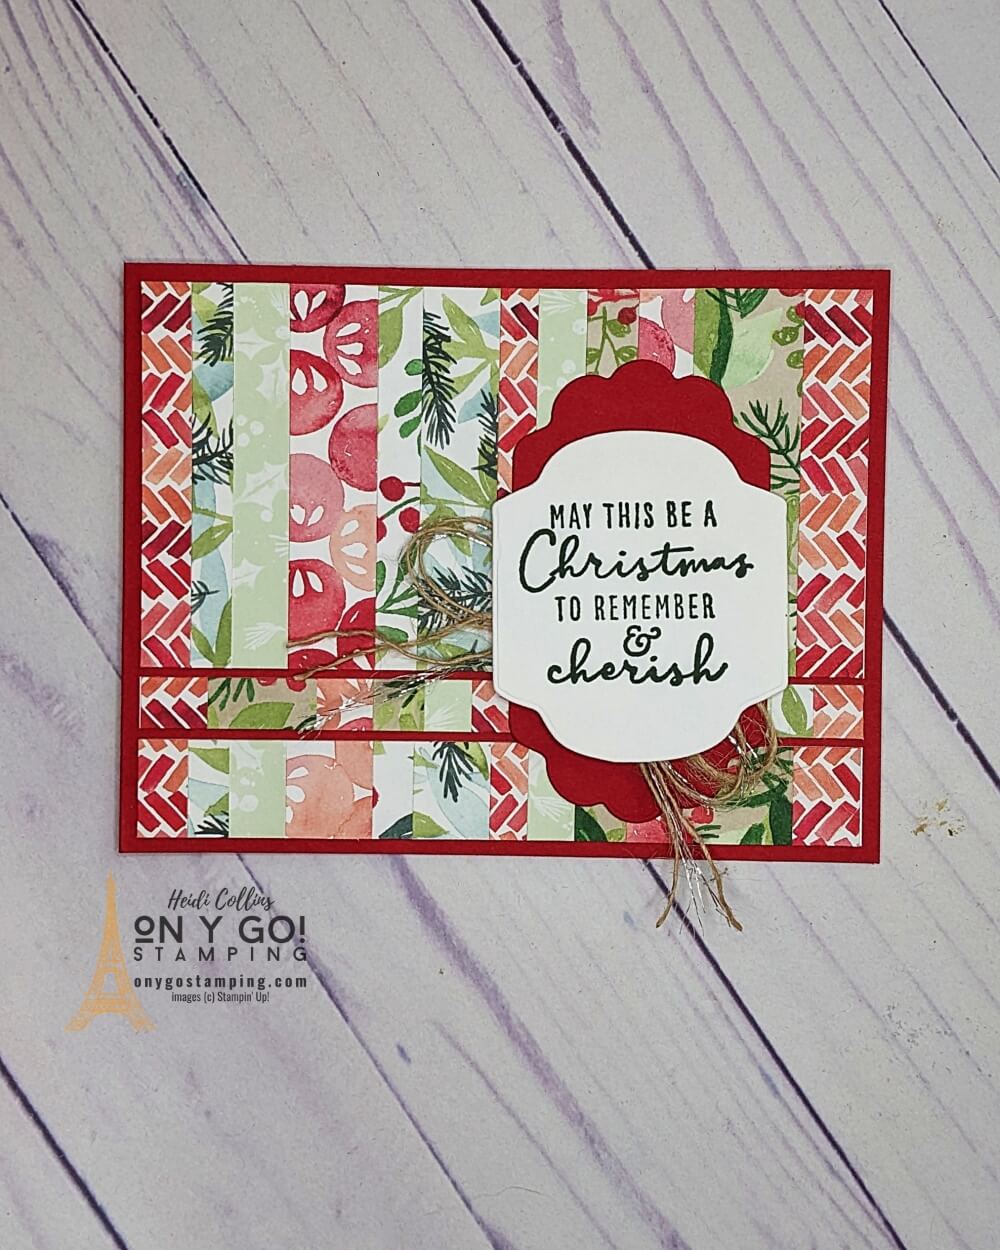 Make a beautiful handmade Christmas card using scraps of holiday patterned paper like the Painted Christmas paper from Stampin' Up! Finish it off with a simple sentiment!